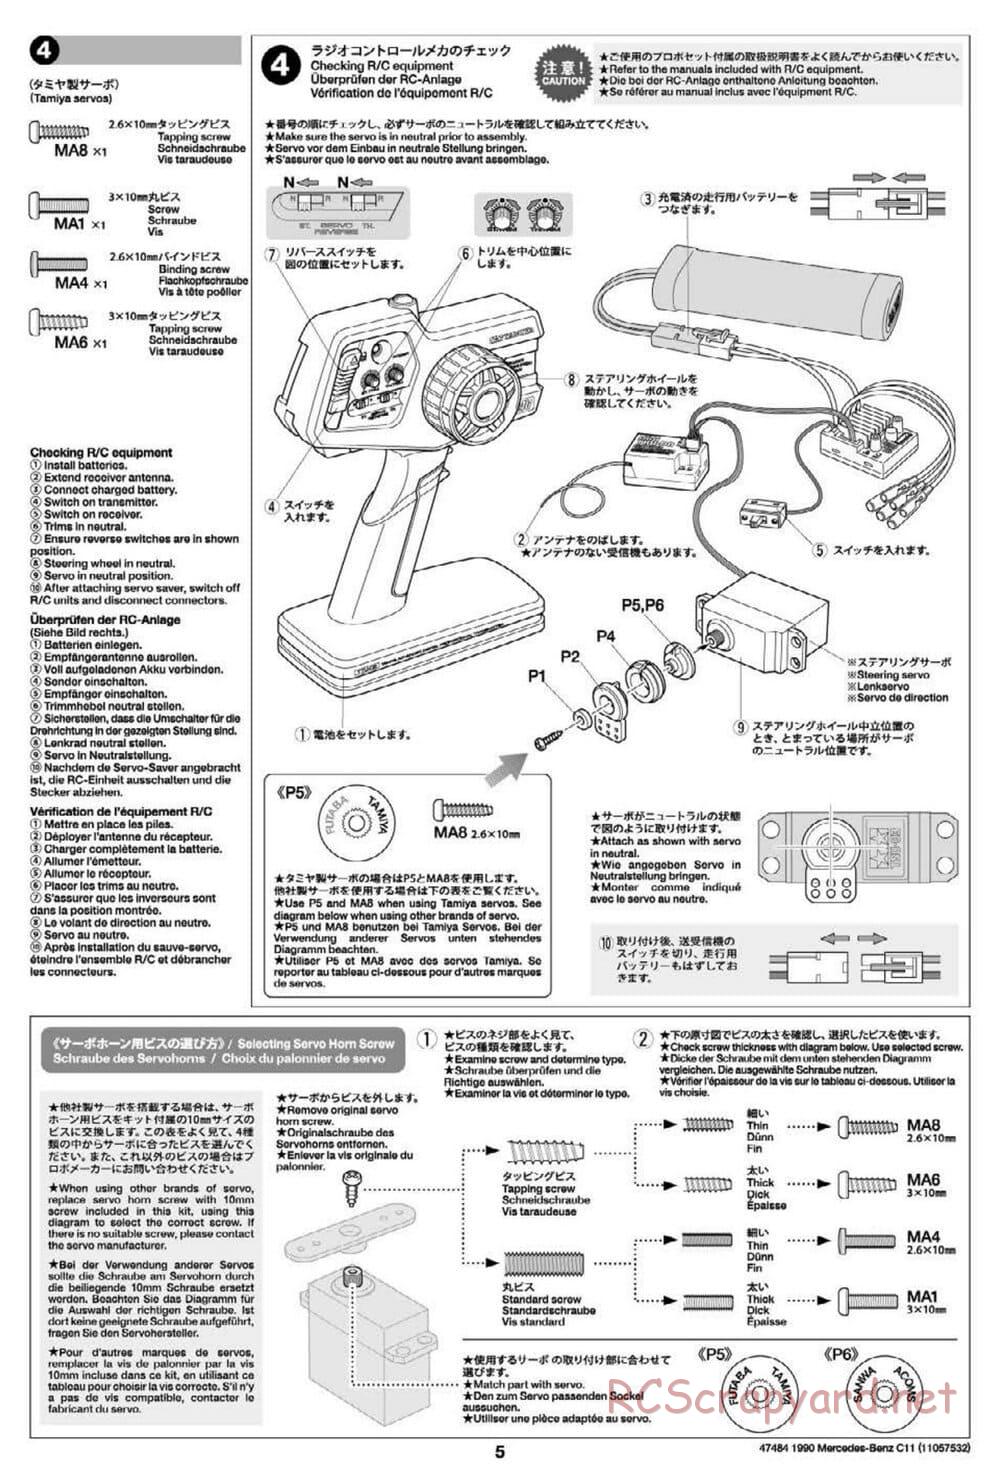 Tamiya - 1990 Mercedes-Benz C11 - Group-C Chassis - Manual - Page 5